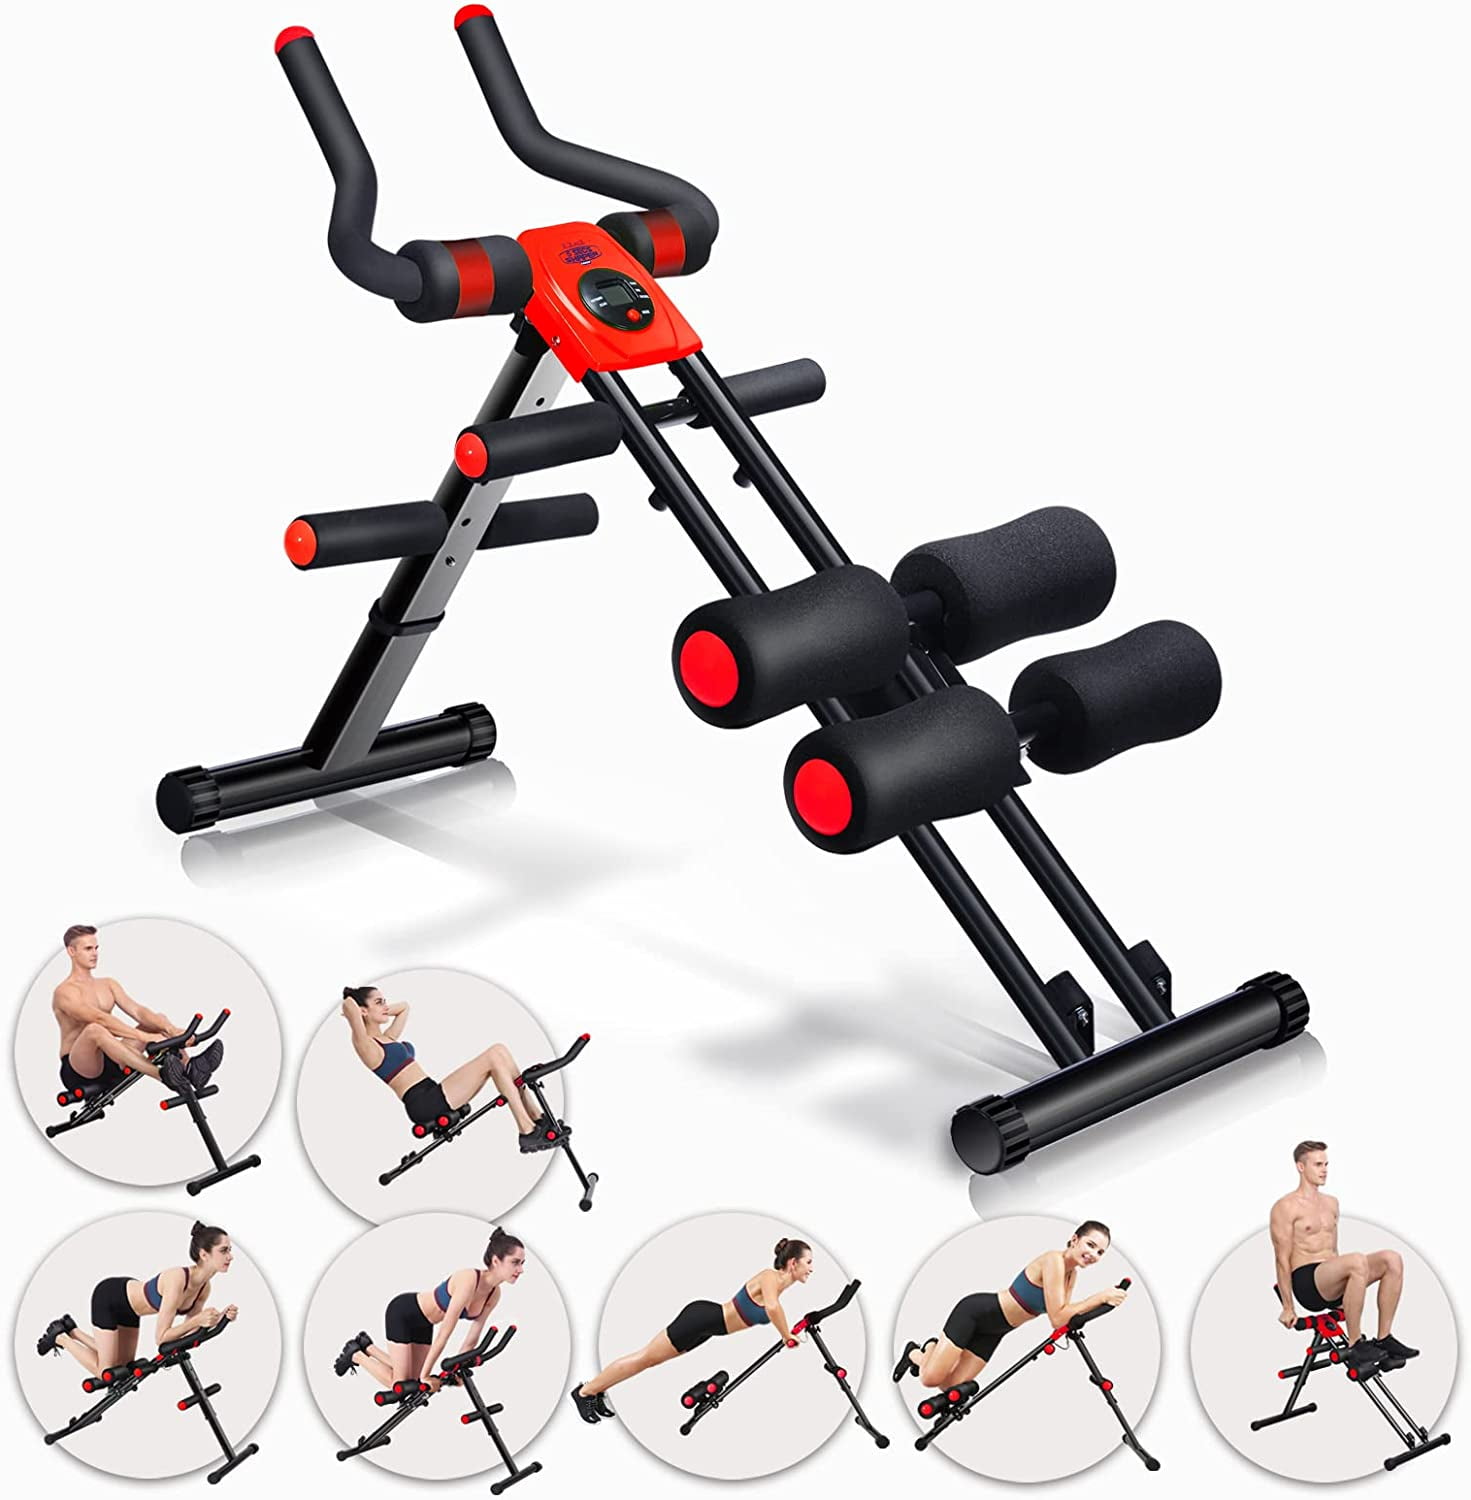 MBB Multifunction Home Gym Equipment,Ab Machine,Height Adjustable Ab  Trainer,Workout Machine,Thighs,Buttocks Shaper,Abdominal,Leg and Arm  Exercises 